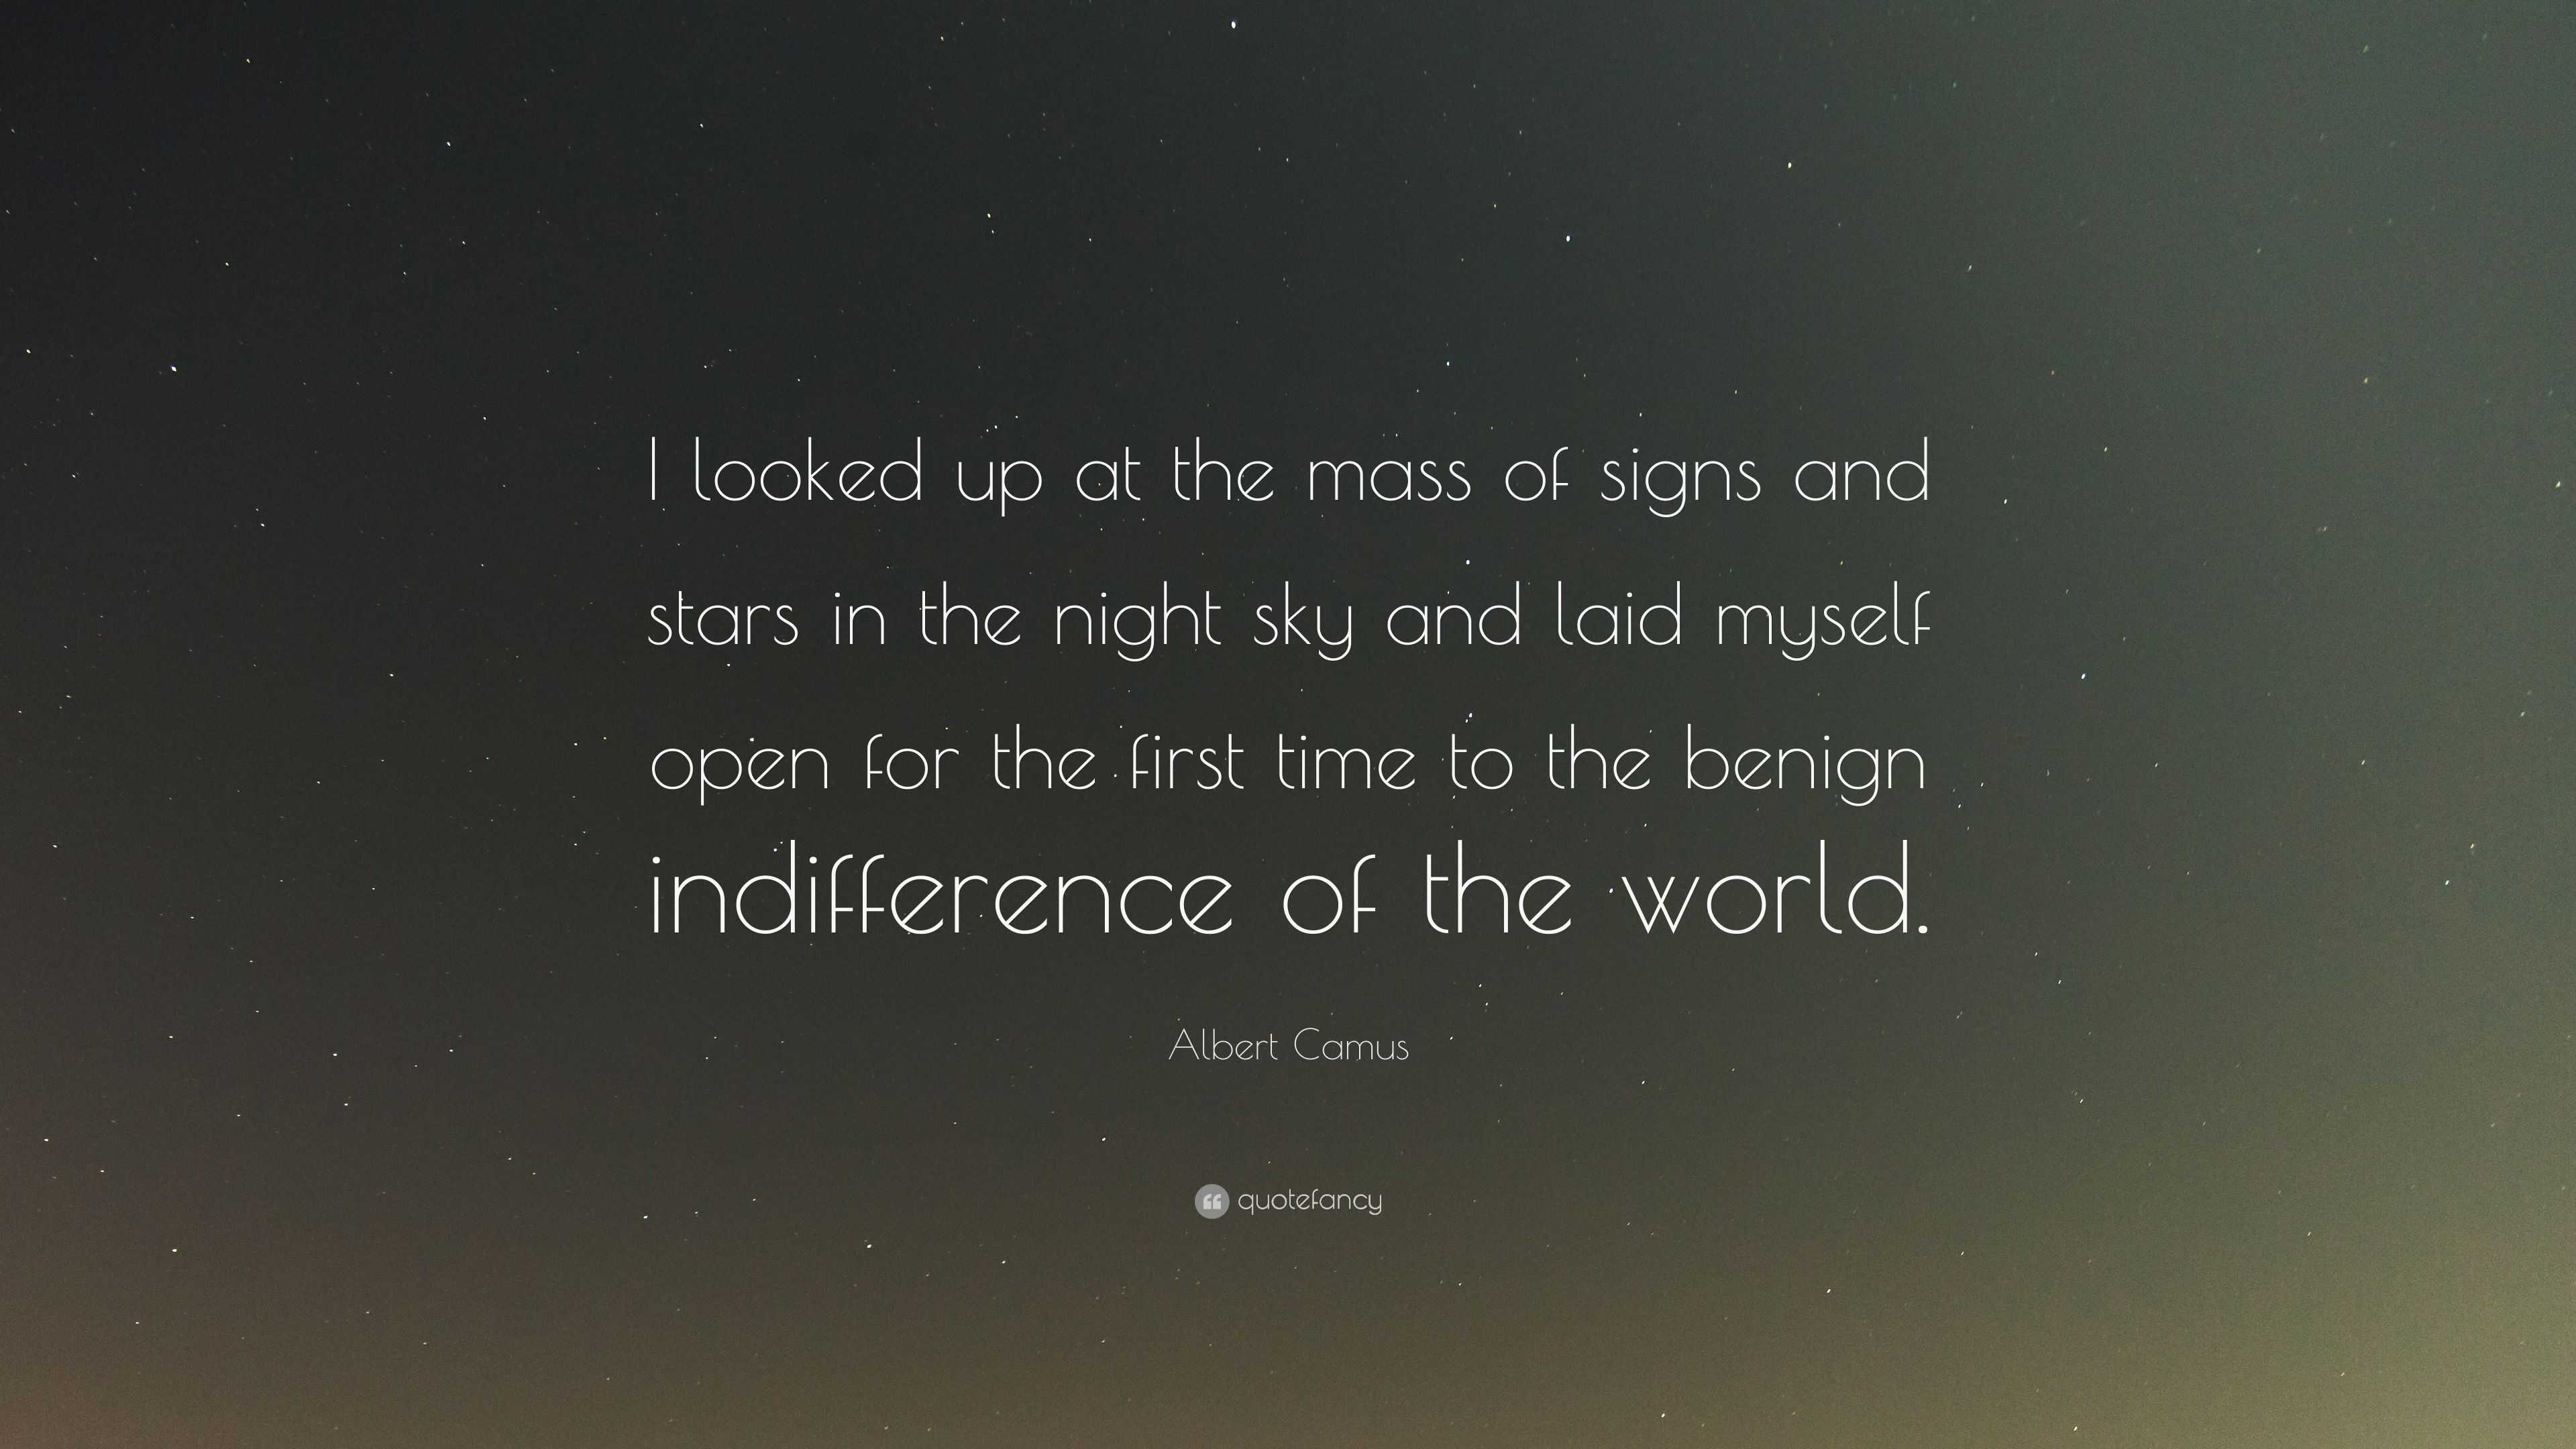 Albert Camus Quote: “I looked up at the mass of signs and stars in the ...